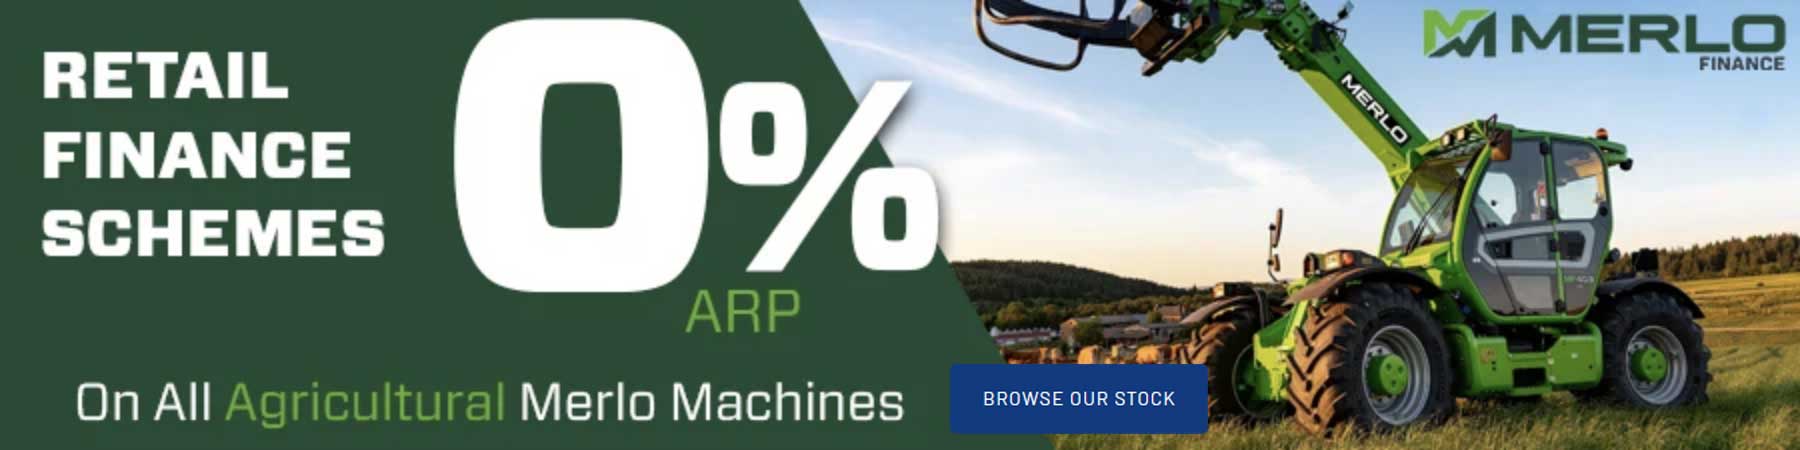 0% APR Retail Finance on All Agricultural Merlo Machines